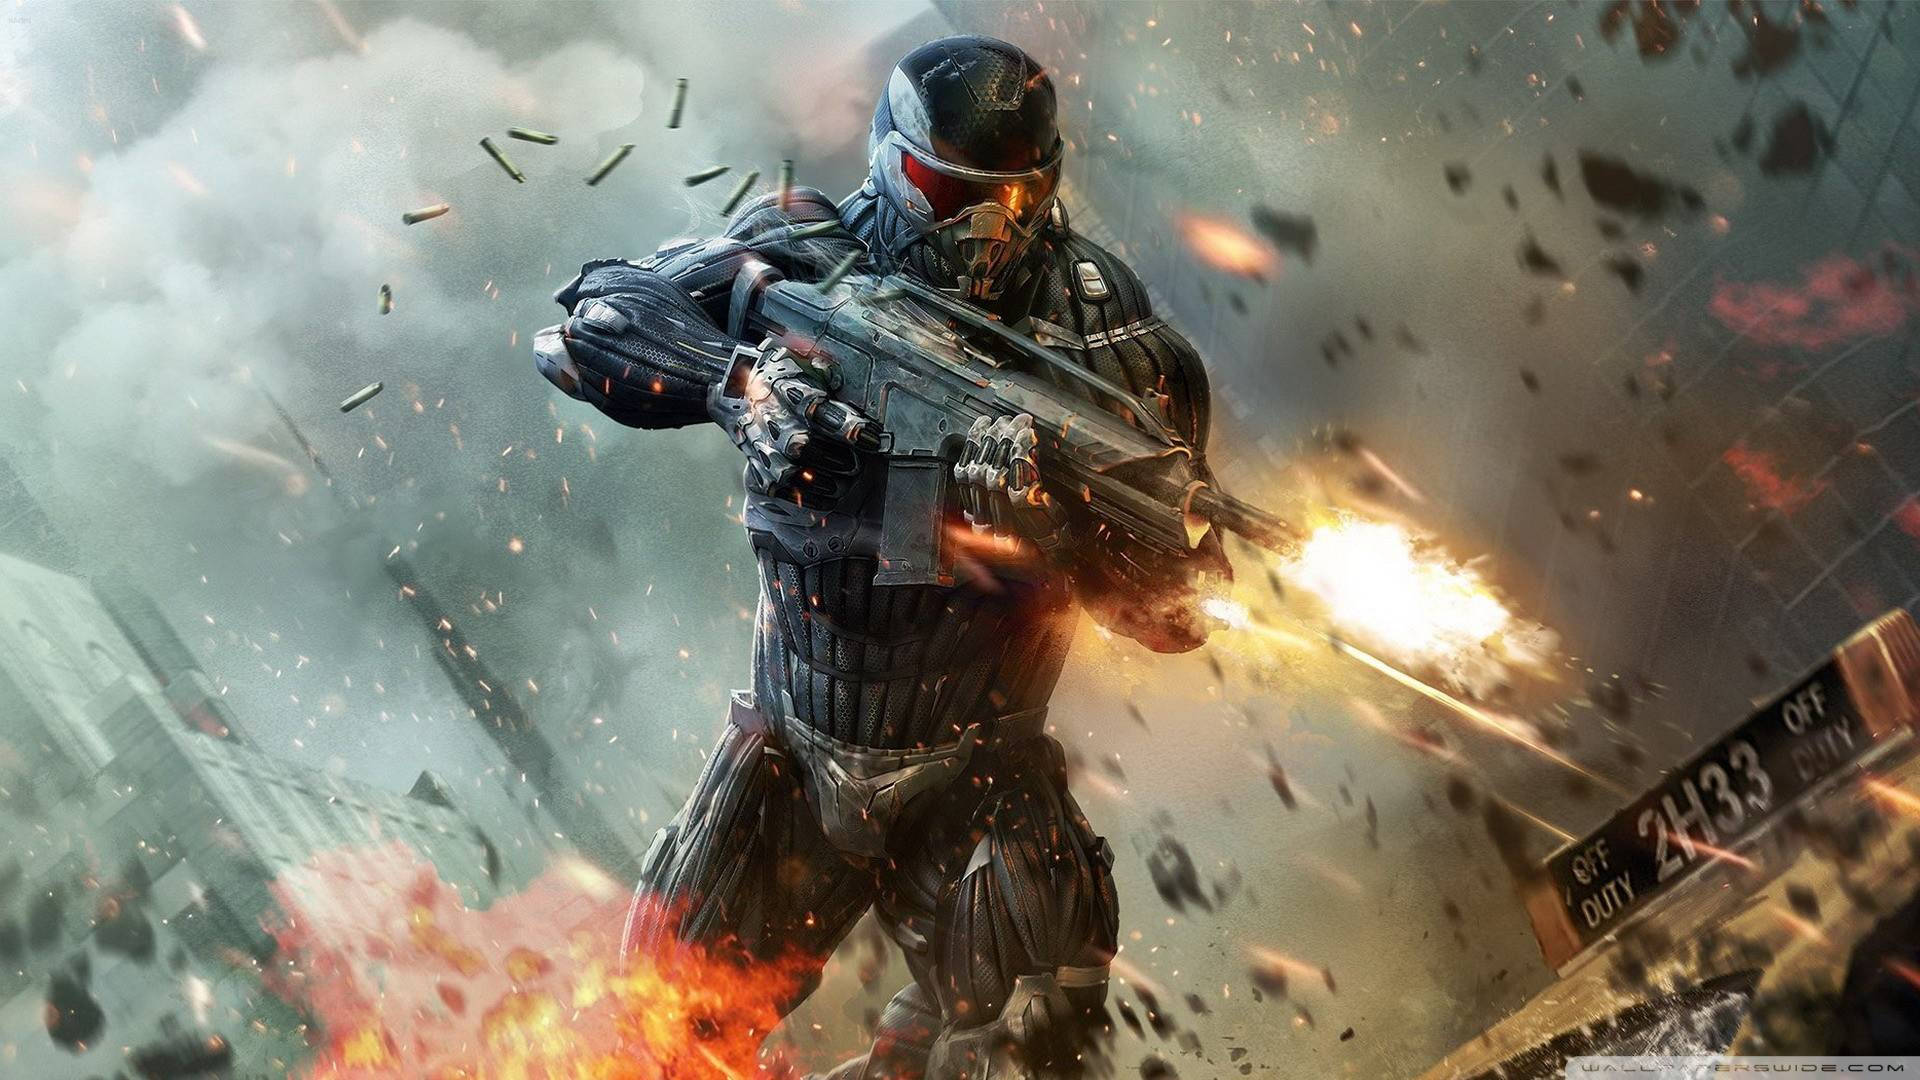 Thrilling Action In Crysis 2 3d Game. Wallpaper